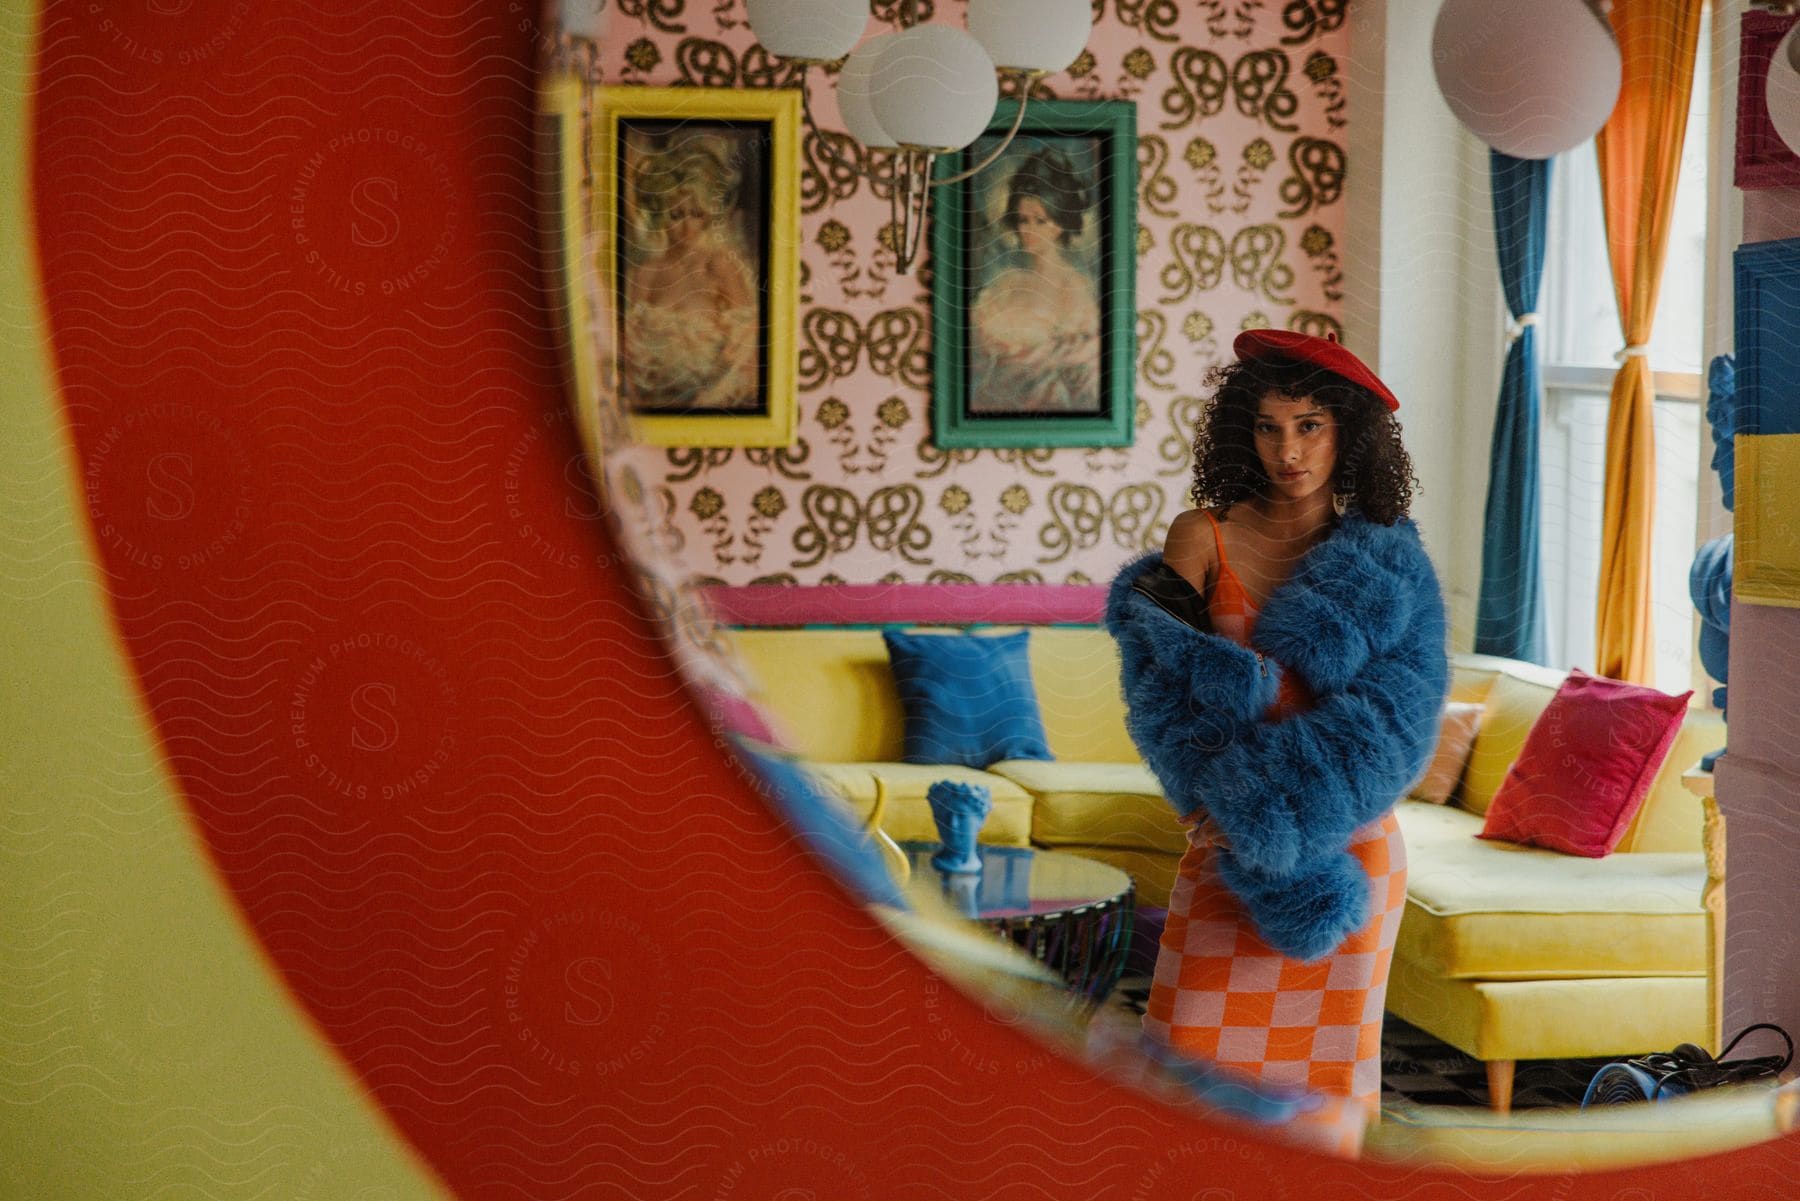 Reflection in a mirror of a young woman wearing a beret and a blue furry coat posing in a garishly colored room